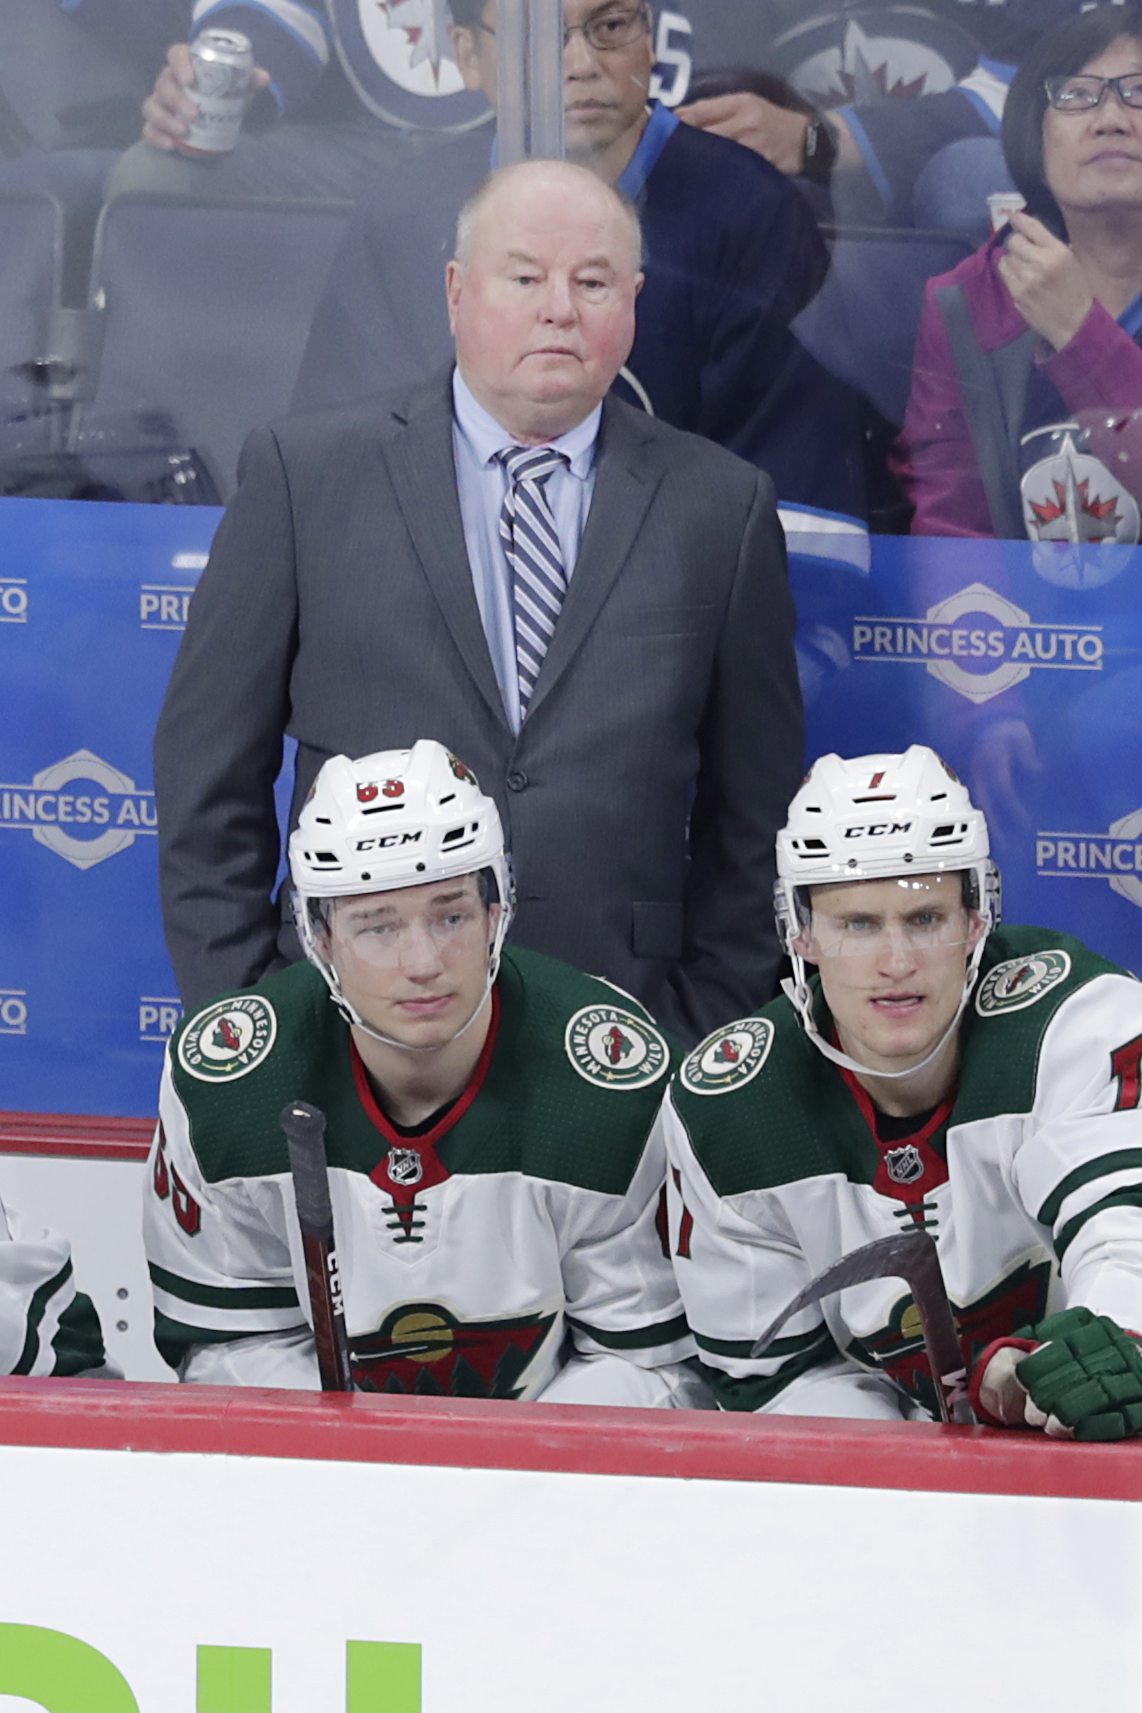 Confirmed with Link: - Bruce Boudreau new head coach of the Wild